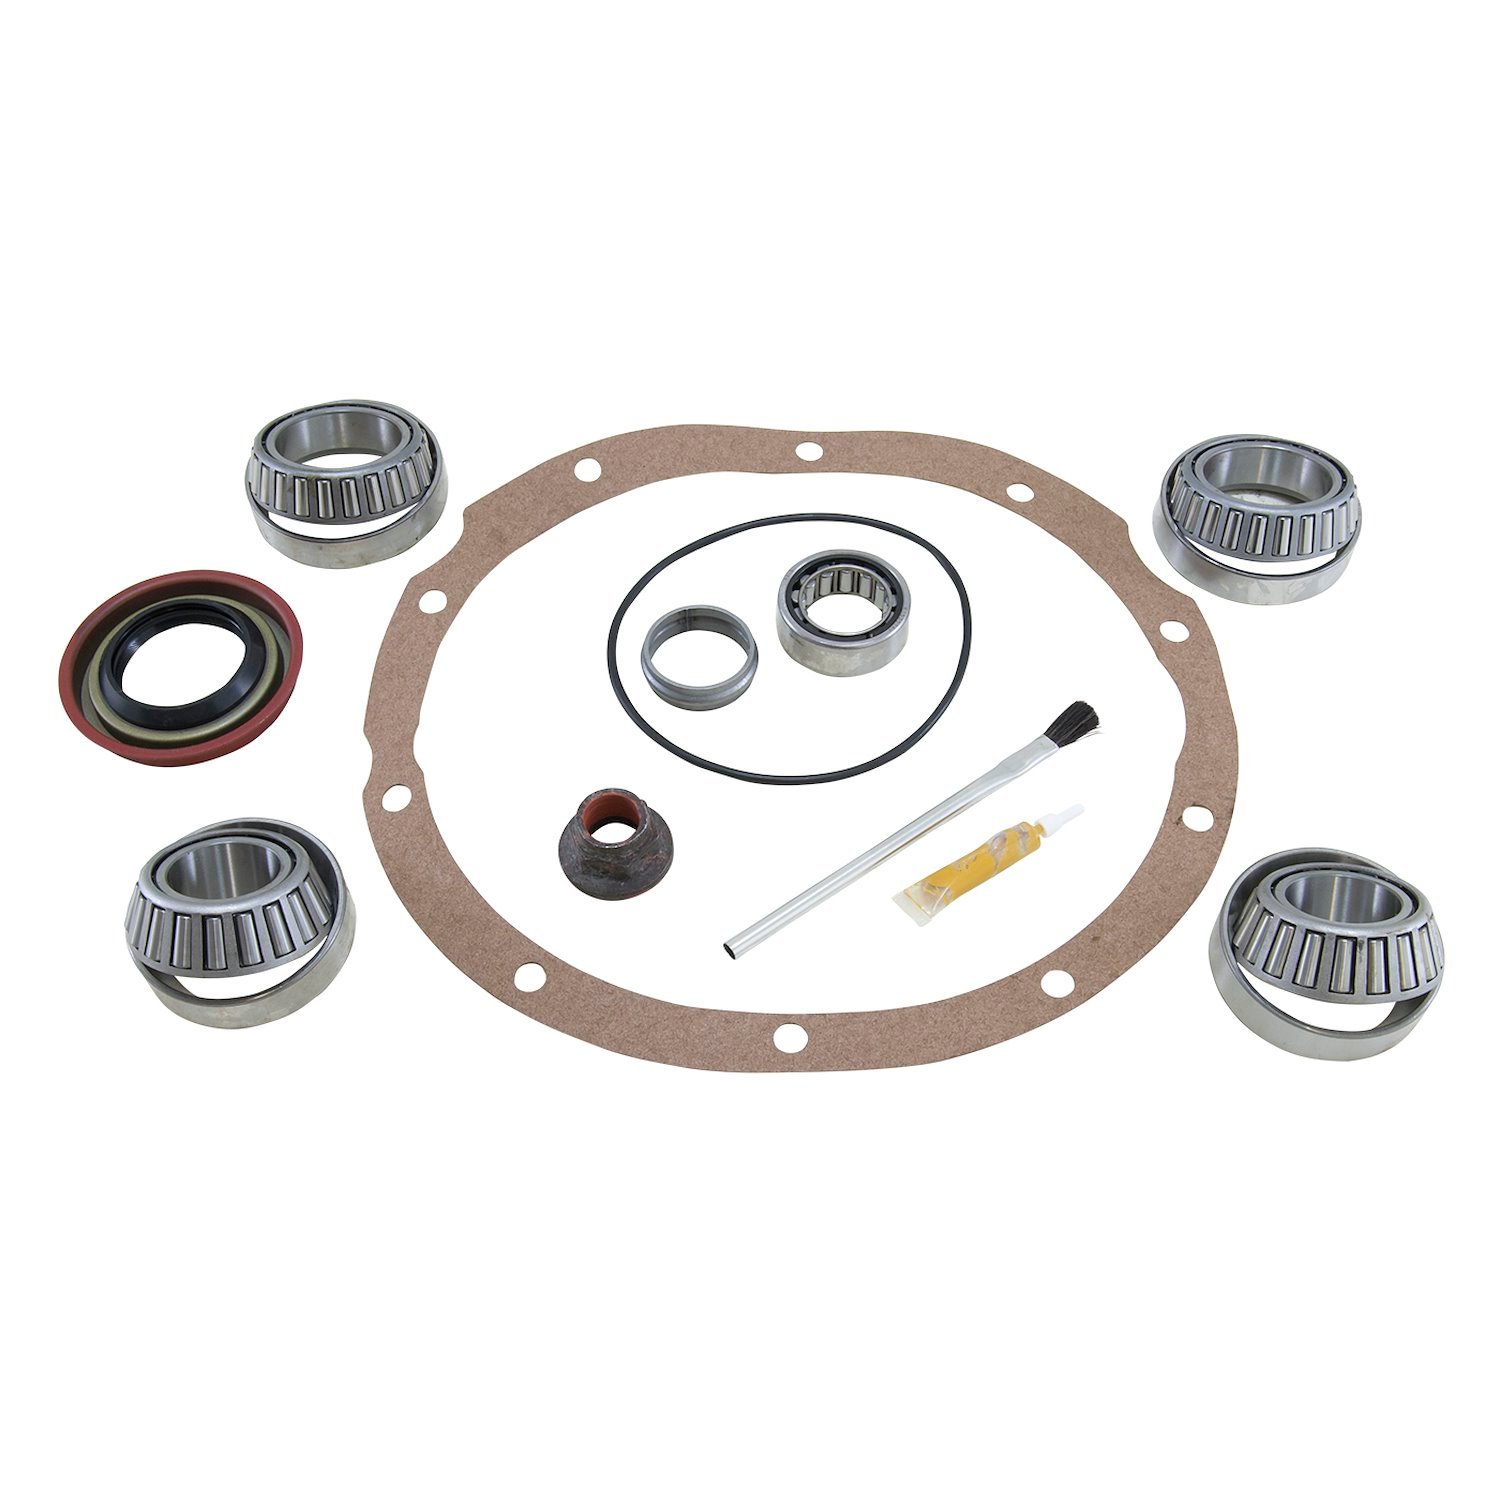 Bearing Install Kit For Ford 9 in. Differential, Lm102910 Bearings